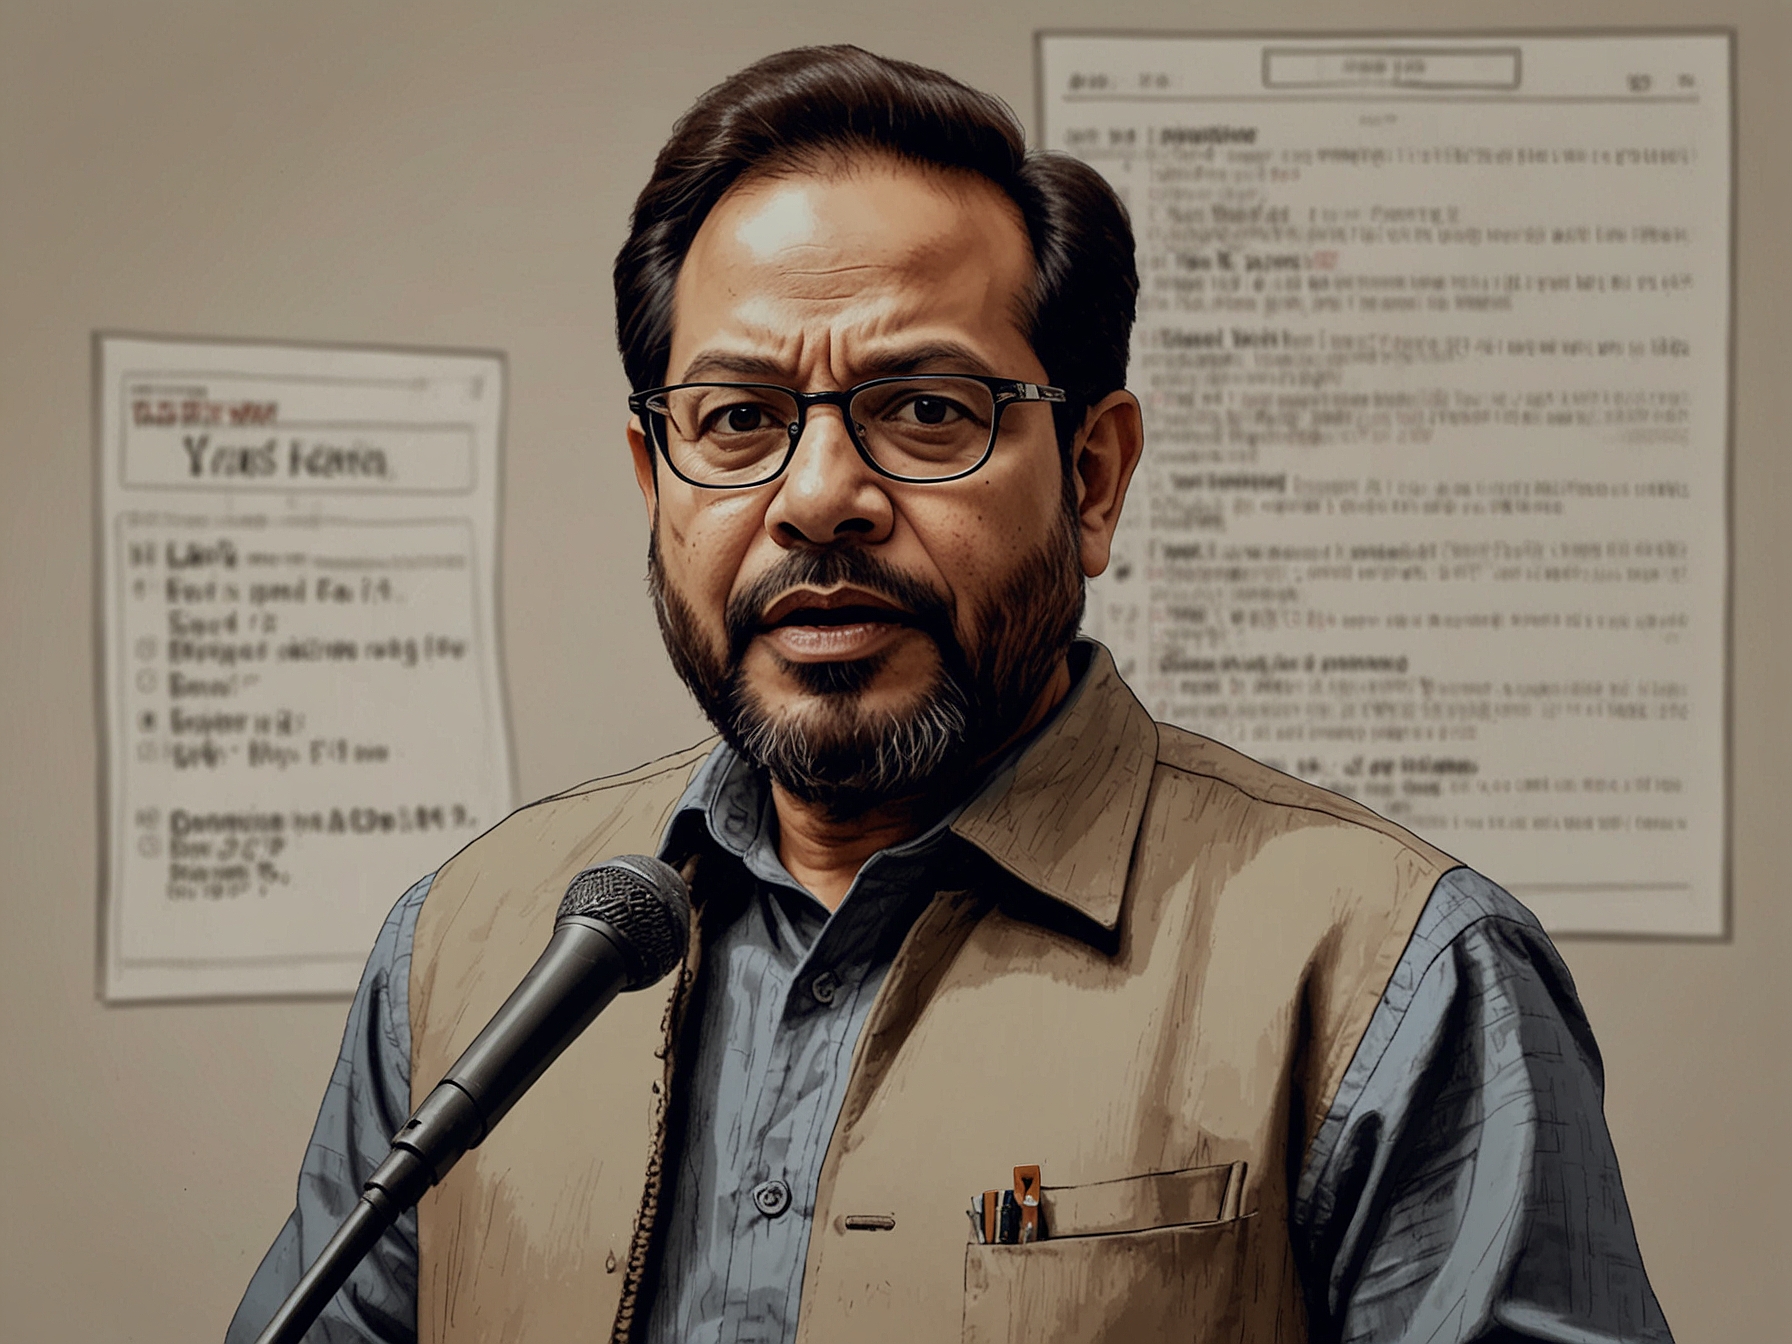 Mukhtar Abbas Naqvi addressing the media with a stern expression, denouncing Elon Musk's claims of EVM hacking as an international conspiracy against India's democracy.